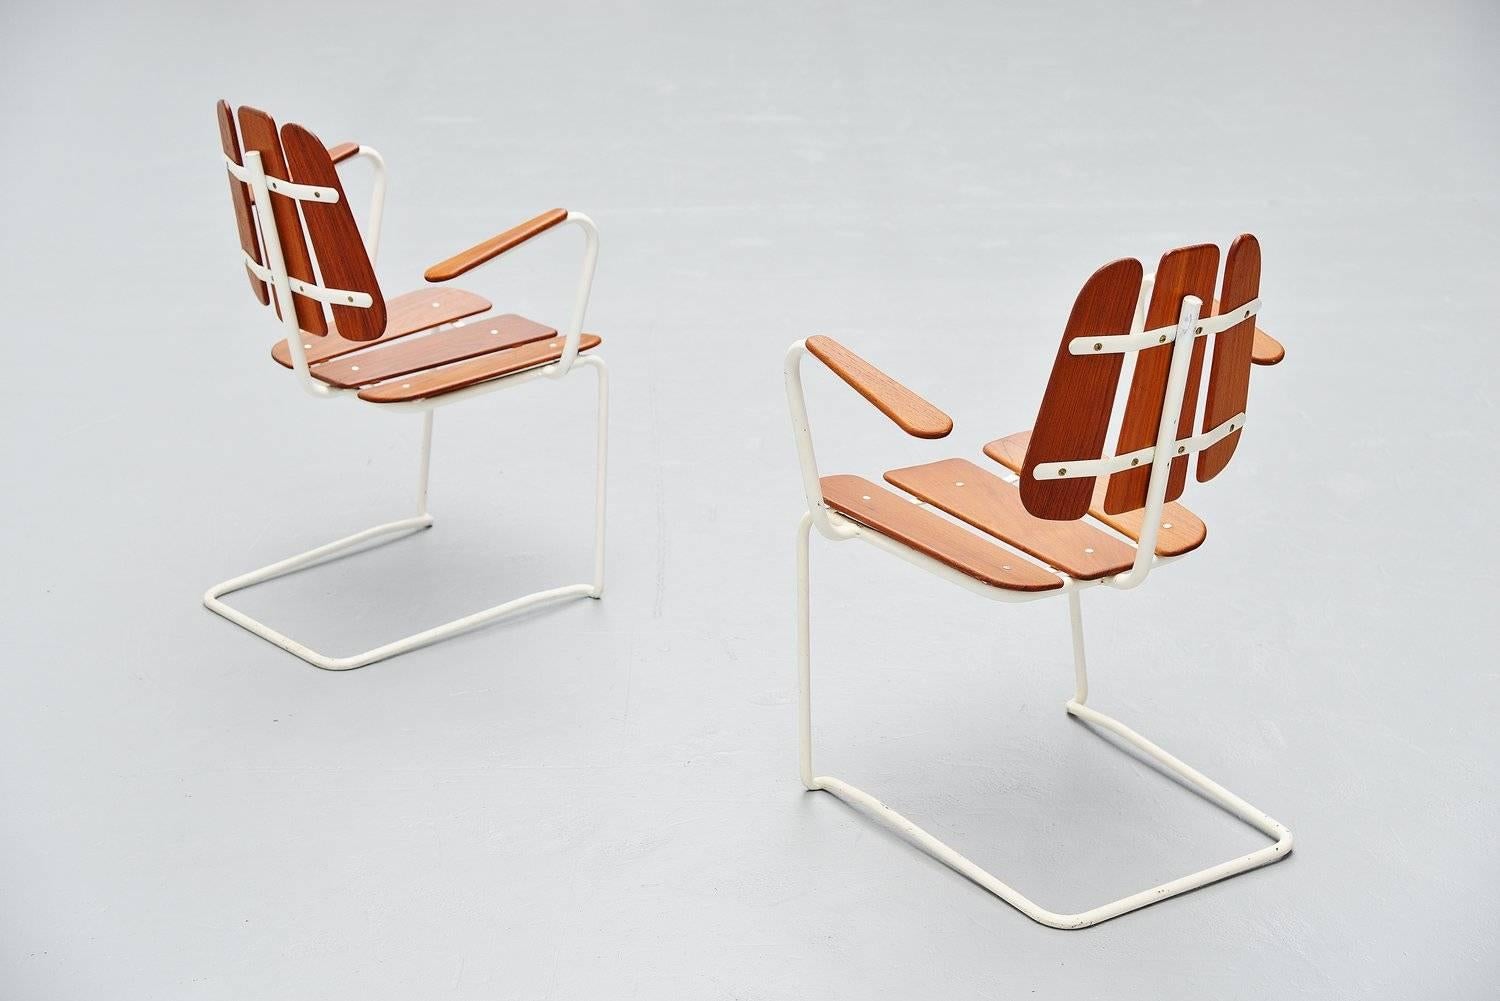 Very unusual pair of cantilevered garden chairs made in Sweden, 1960. These chairs have an off white lacquered tubular metal frame. The seats and backs are made of solid teak wooden slats. The chairs are in very good original condition and were